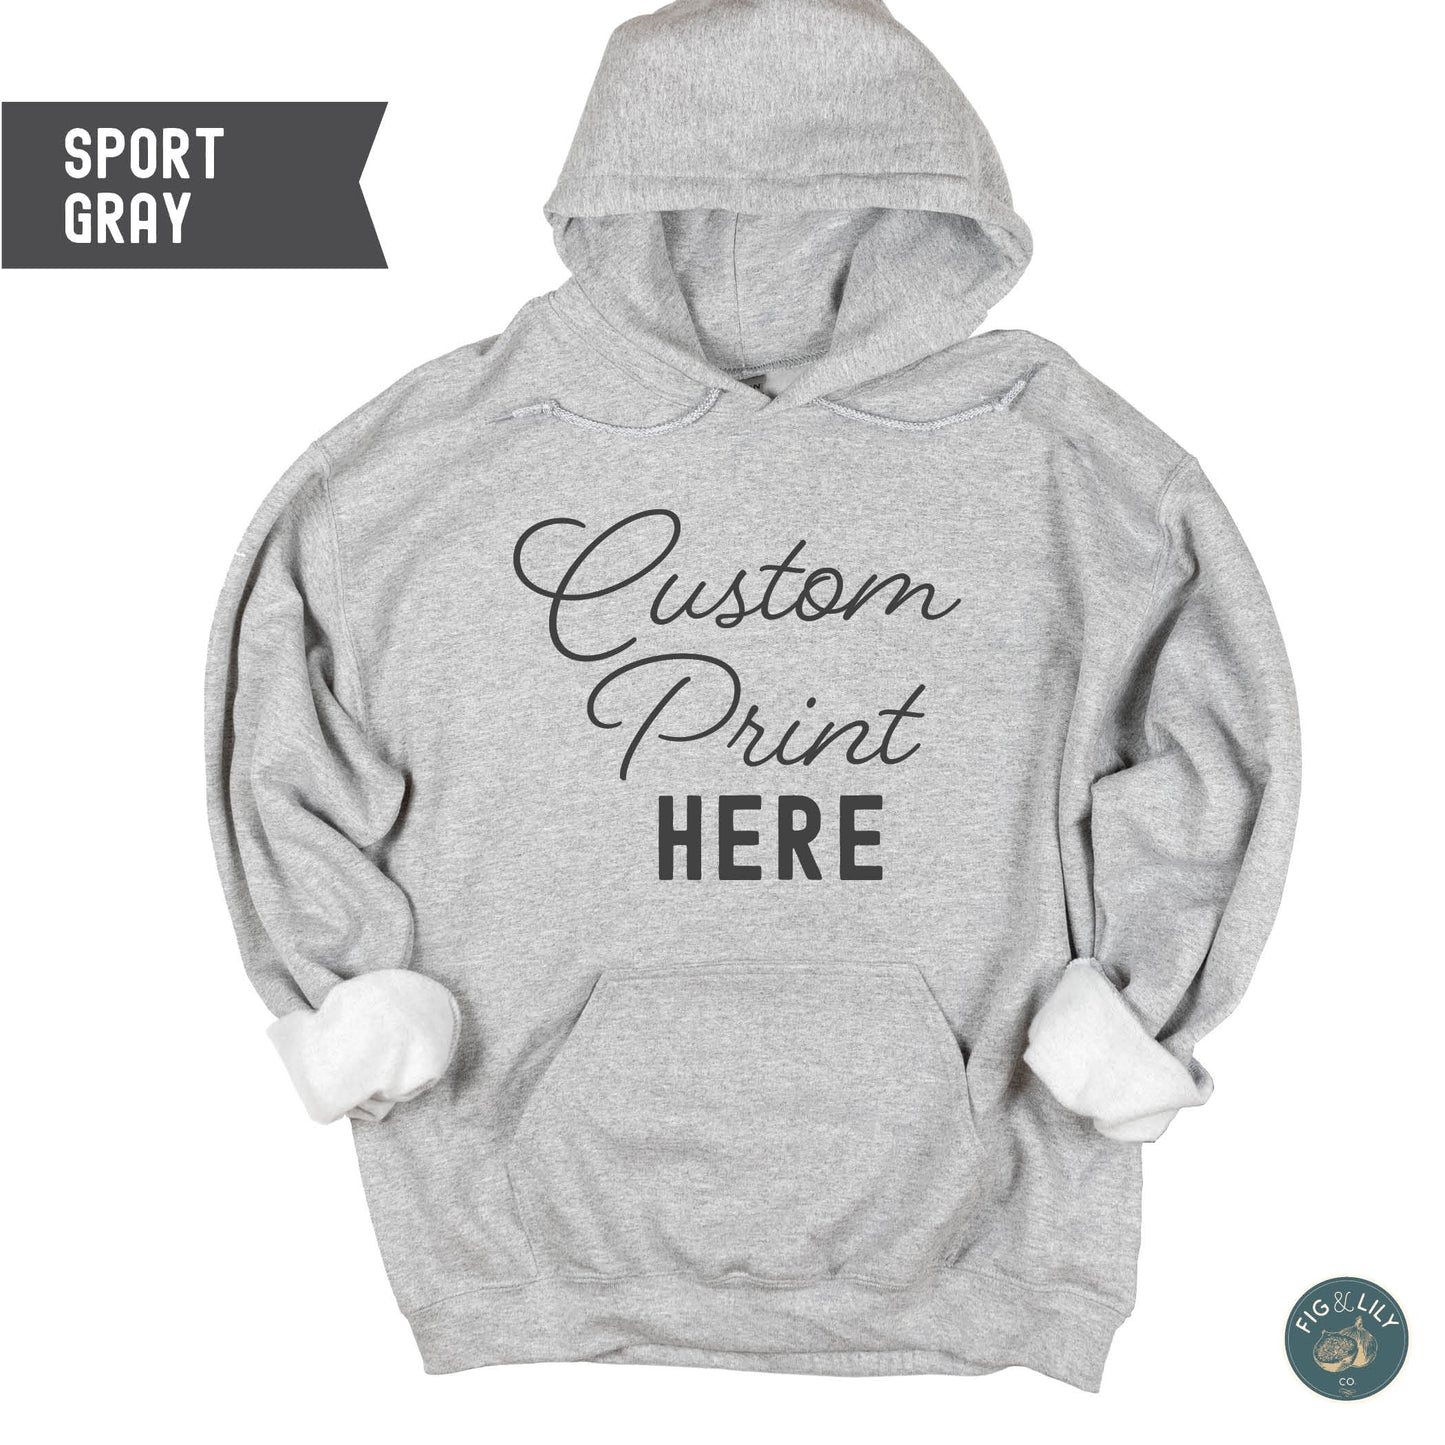 Sport Gray cozy Unisex Hoodie, Custom Printed sweatshirt Design, Your Design Here, Personalized Design created just for you, digital proof approval included